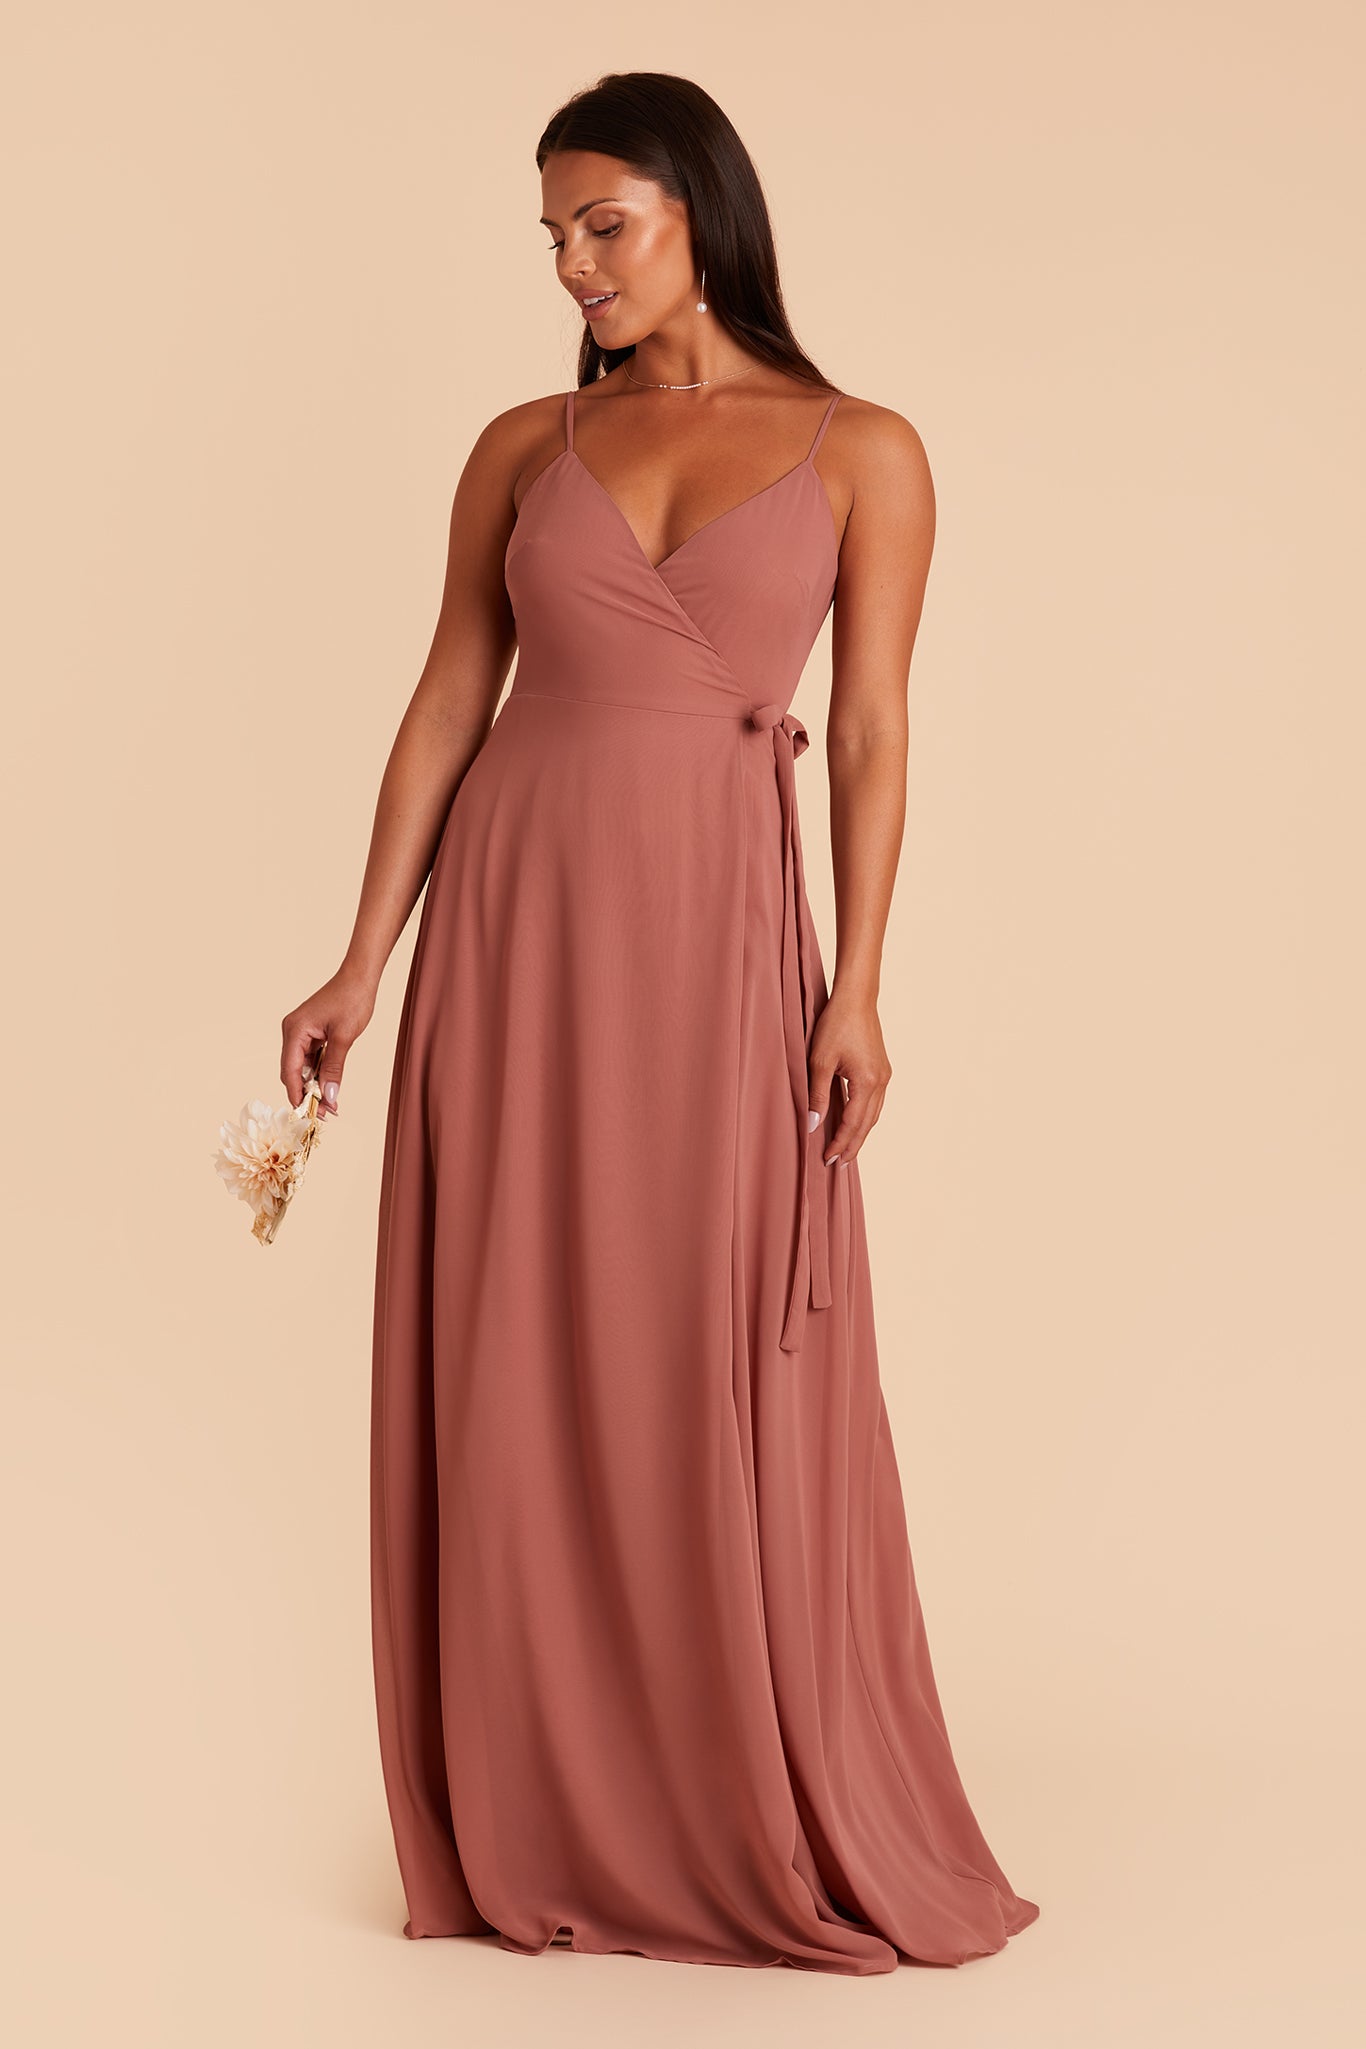 Cindy bridesmaid dress with slit in desert rose chiffon by Birdy Grey, front view